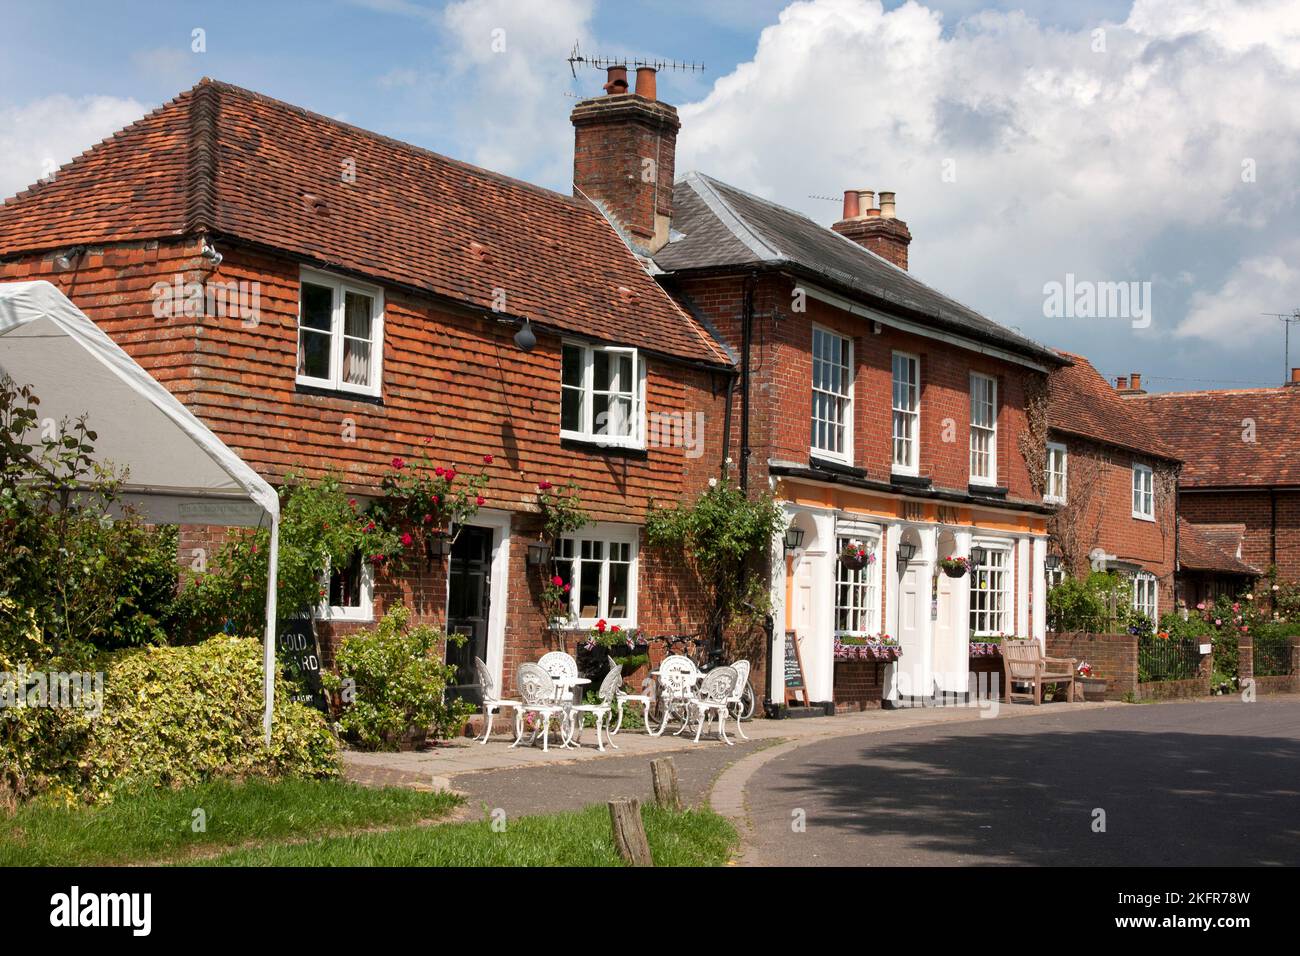 The pretty rural hamlet of Dunsfold near Chiddingfold, Weald, West Sussex, England Stock Photo